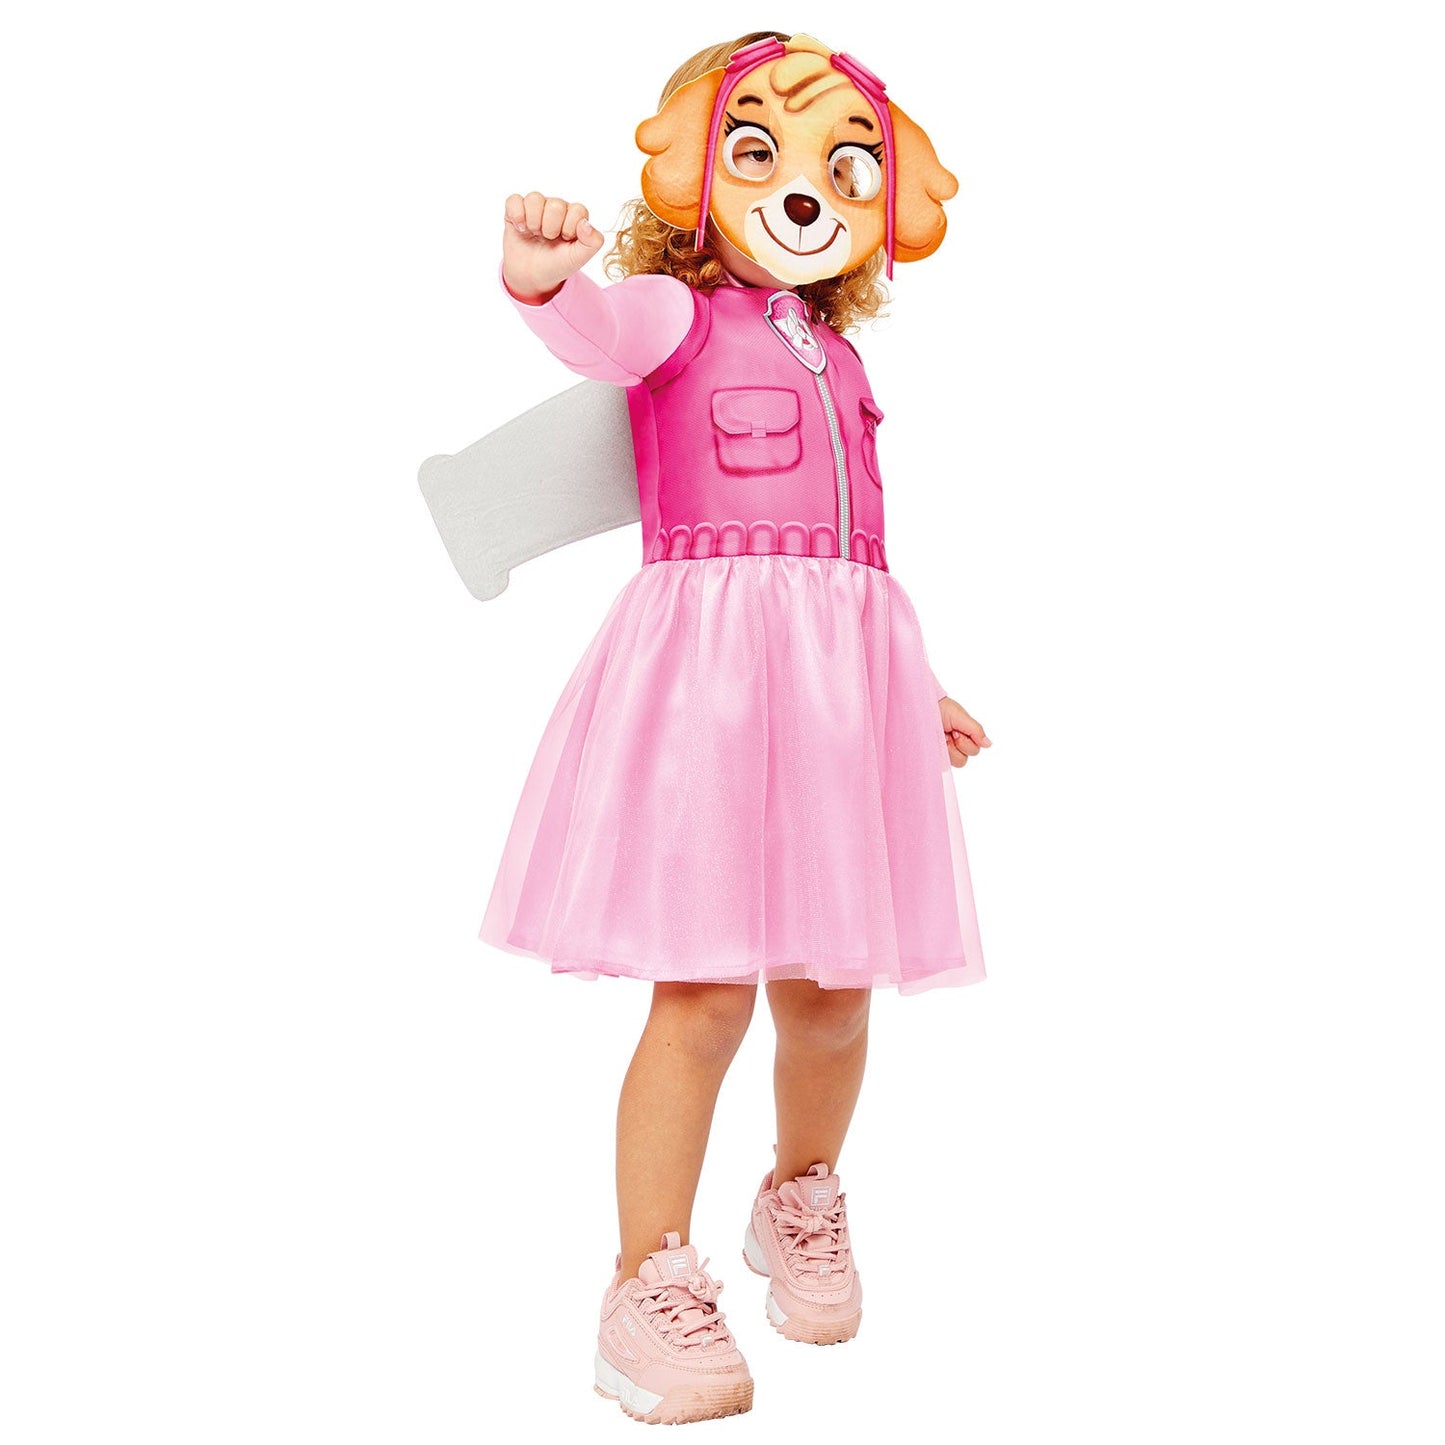 Paw Patrol Skye Costume includes dress, mask and wings